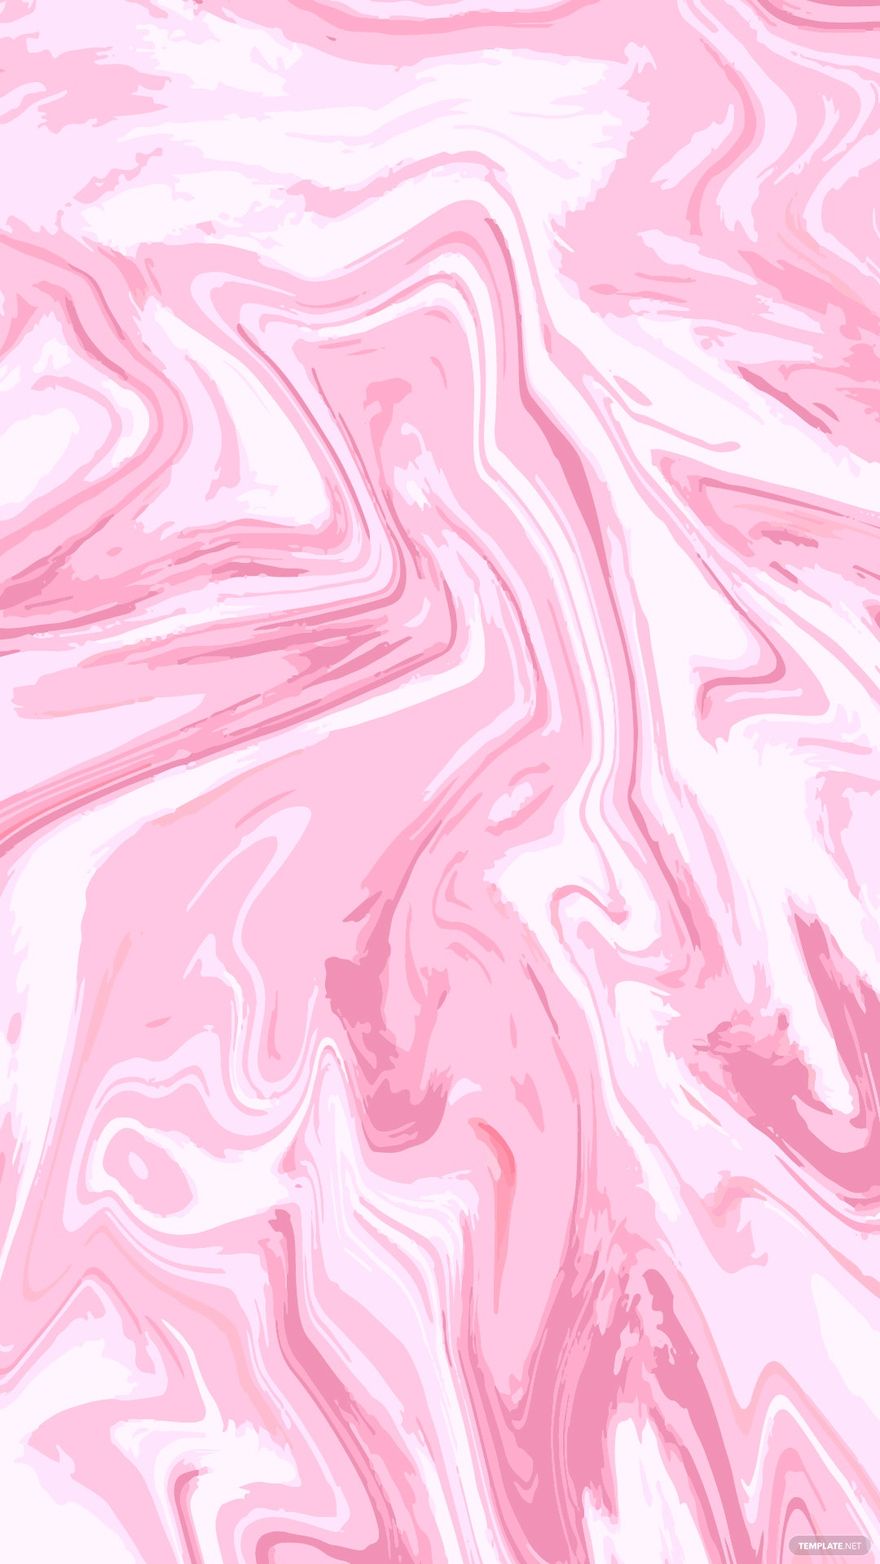 Free Pink Marble iPhone Background in Illustrator, EPS, SVG, JPG